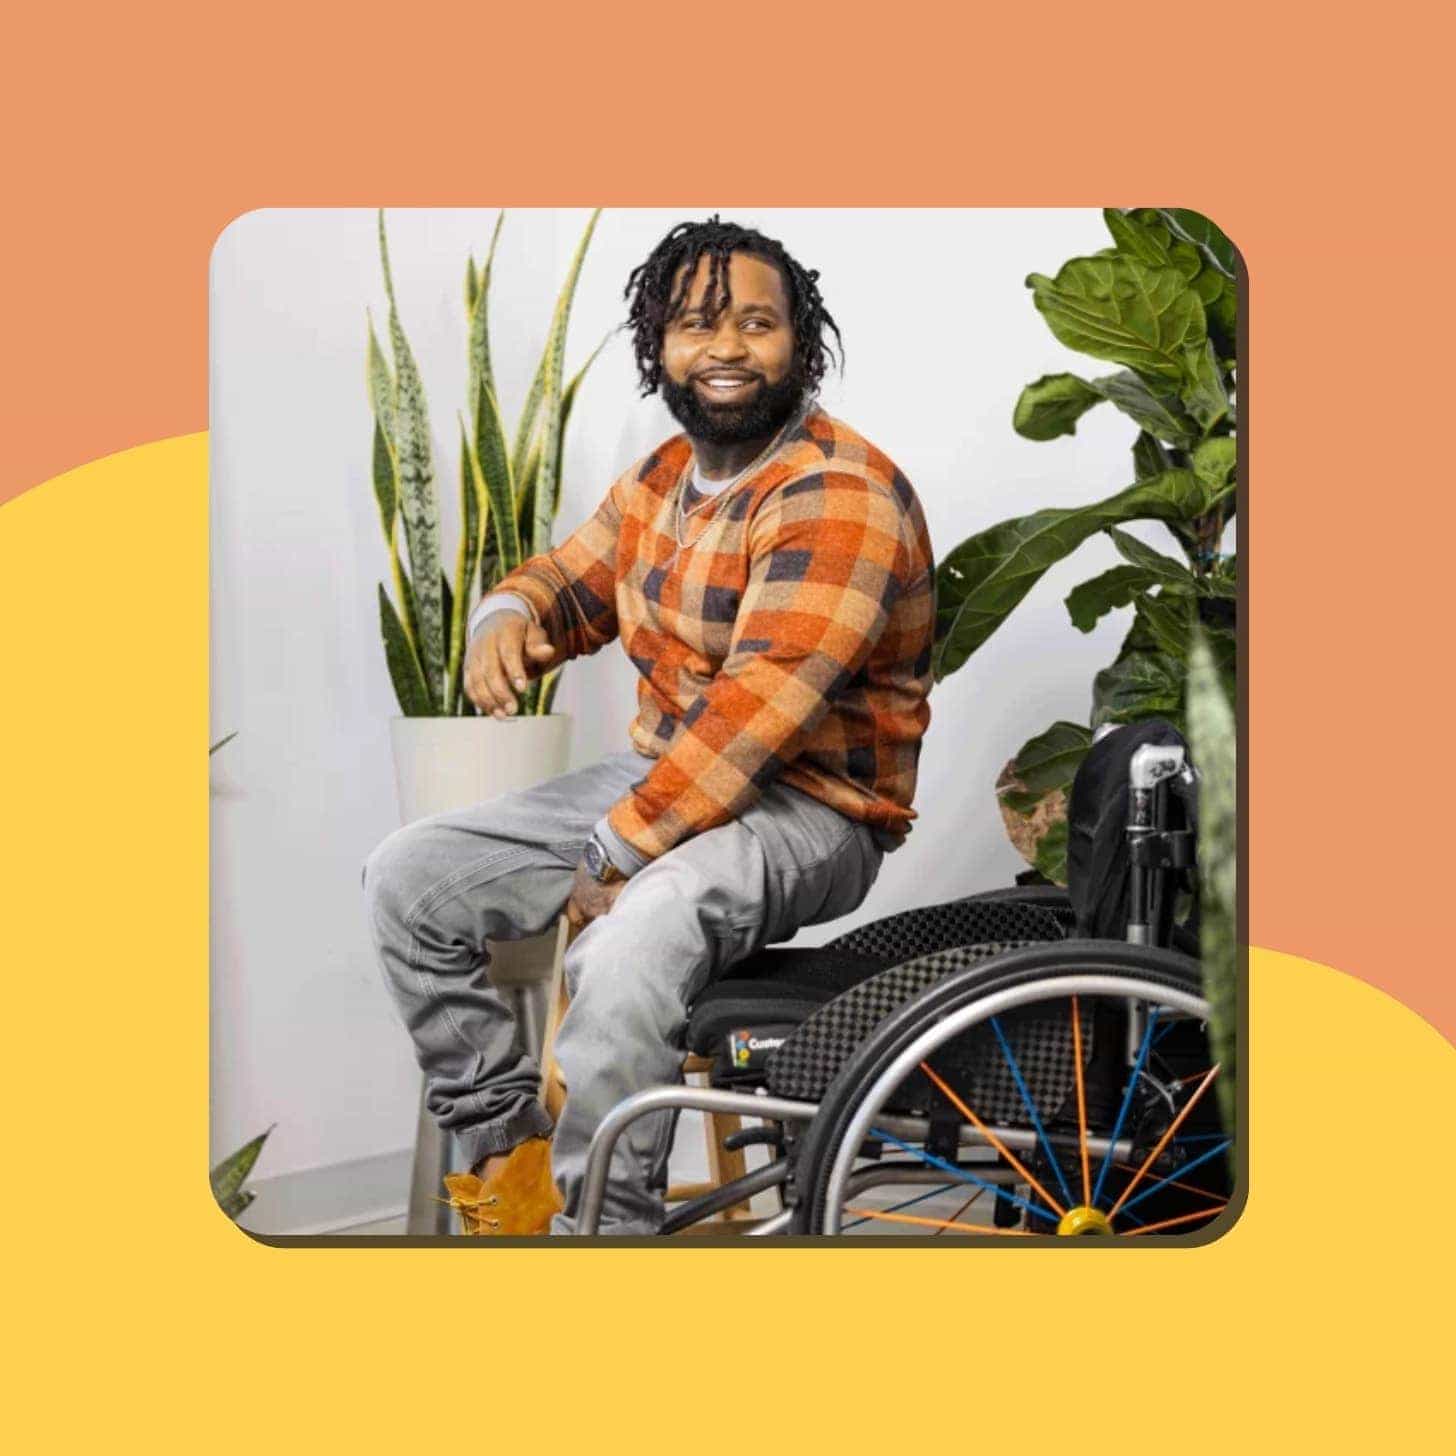 A Black man with cool hair, a beard, and a fashionable sweater, jeans, and boots smiles as he sits next to his wheelchair